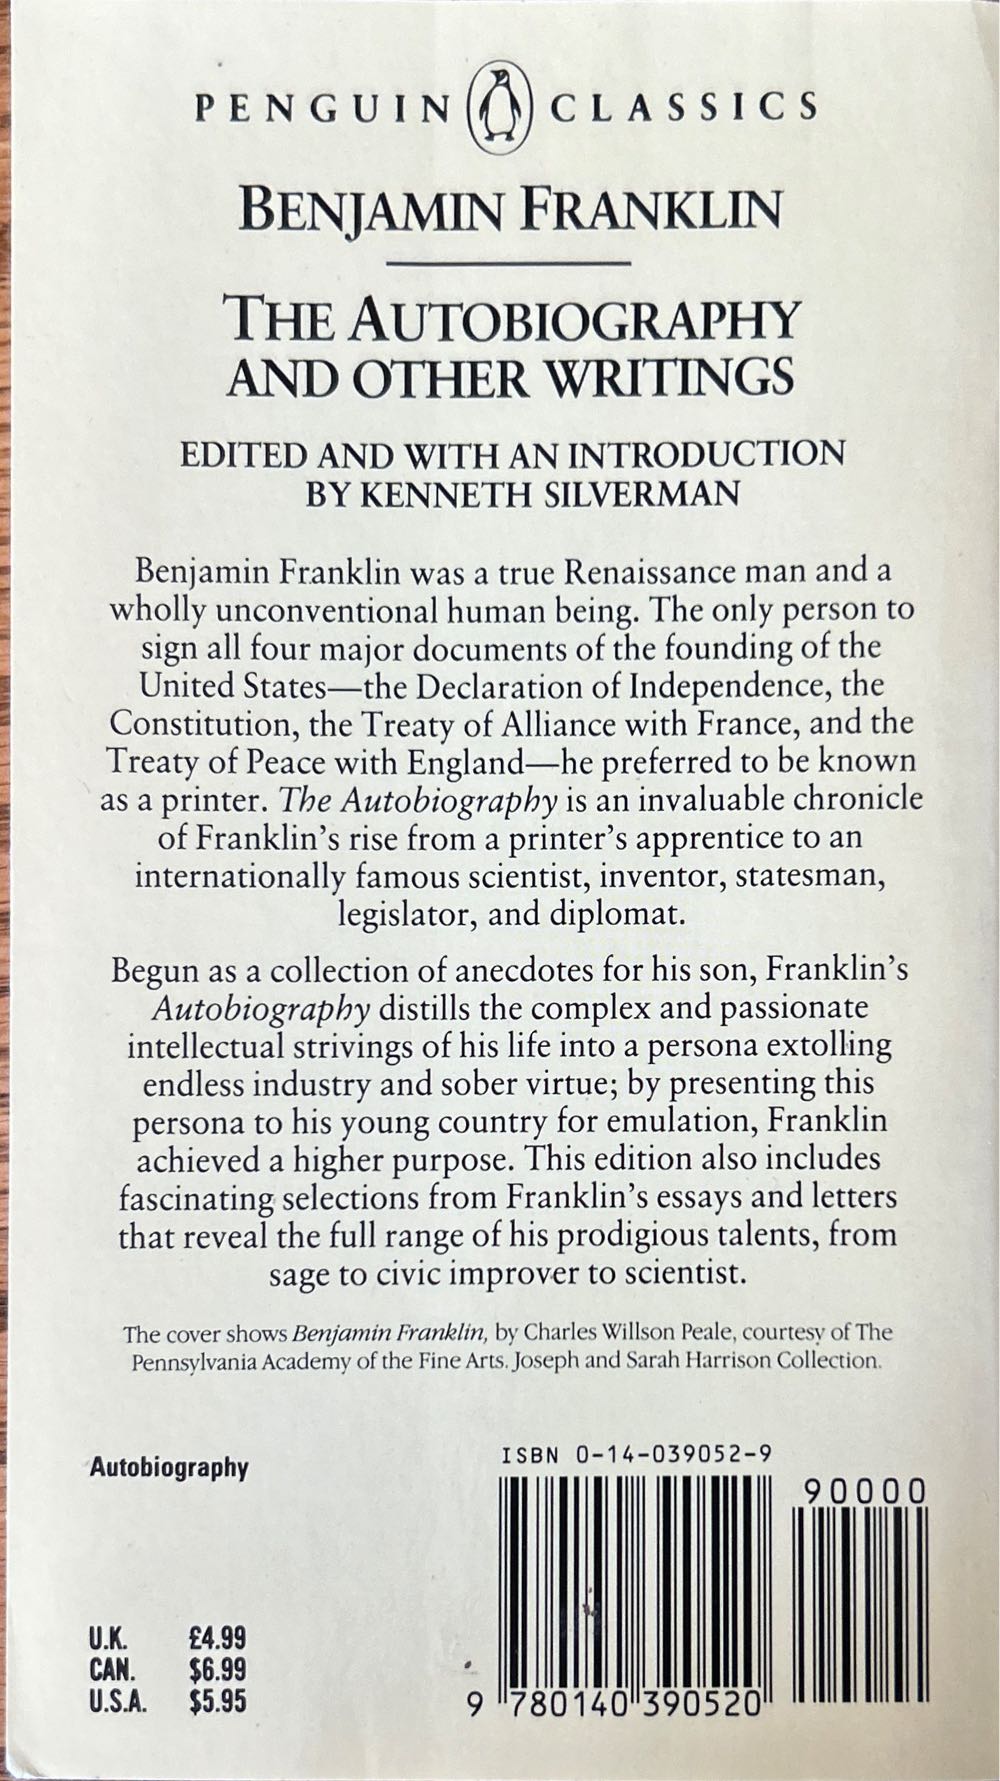 Benjamin Franklin - The Autobiography And Other Writings - Benjamin Franklin (Penguin Classics - Paperback) book collectible [Barcode 9780140390520] - Main Image 2